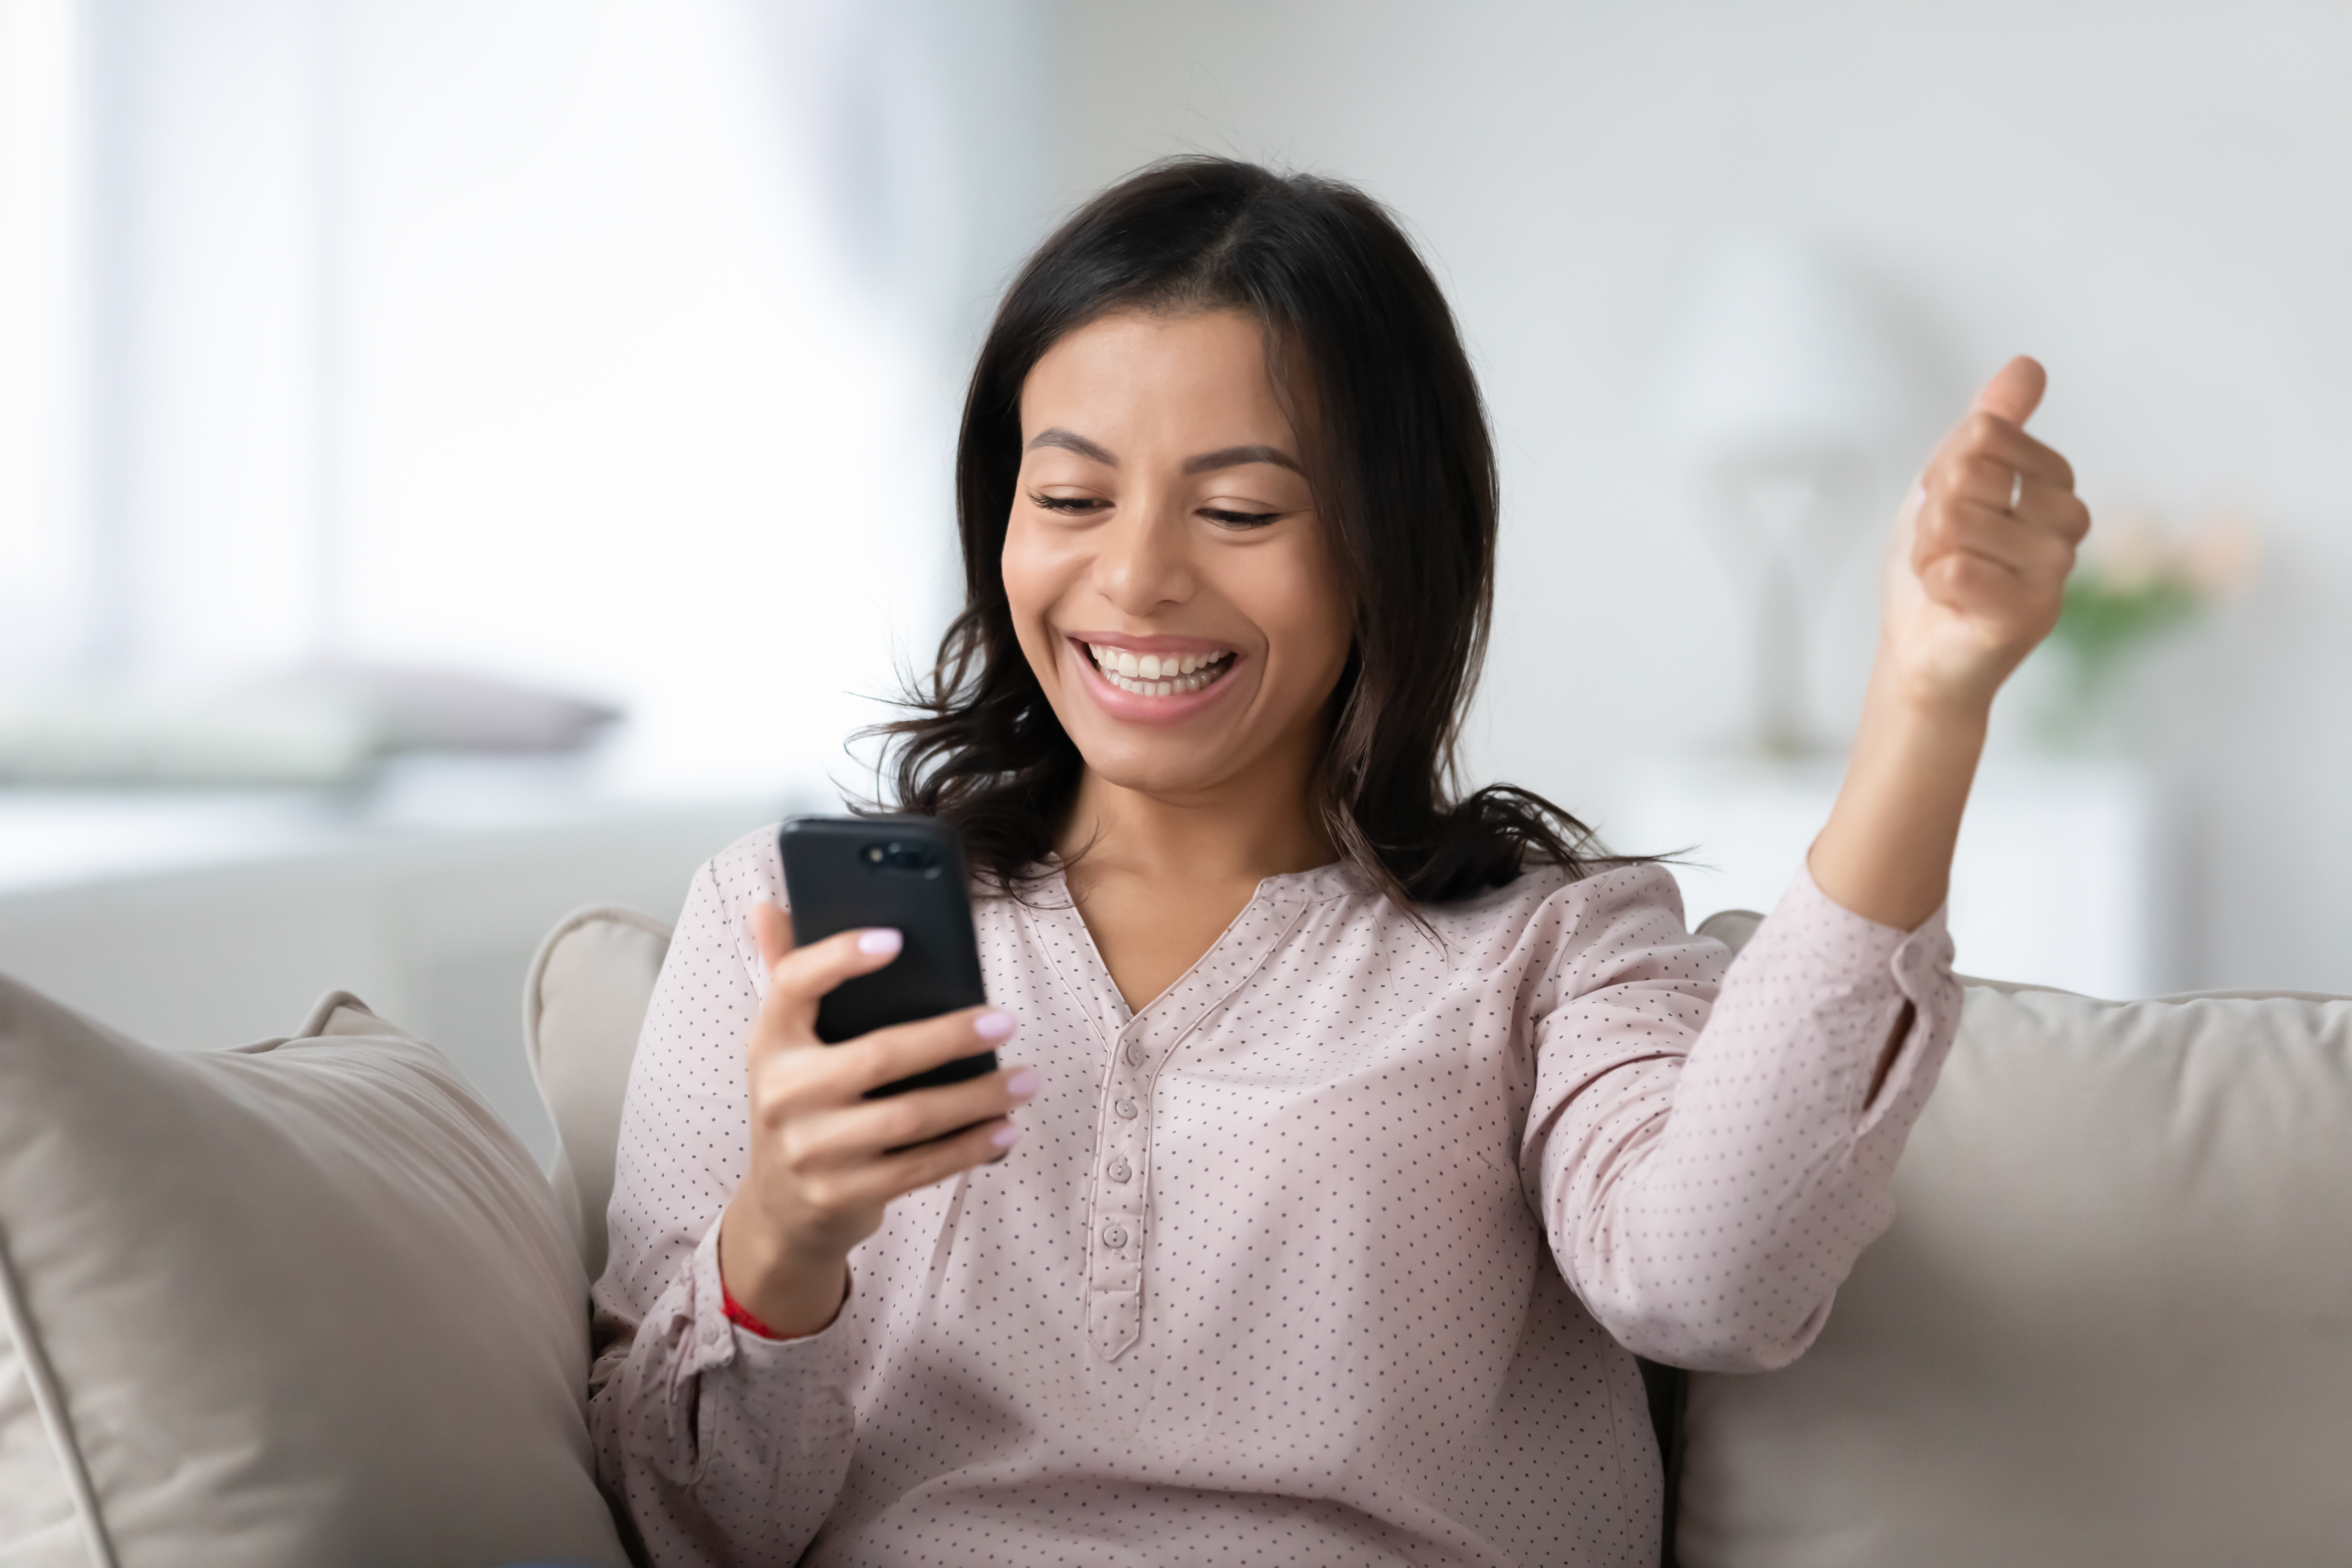 Track your credit score with your cellphone through OneScore app! Source: Adobe Stock.